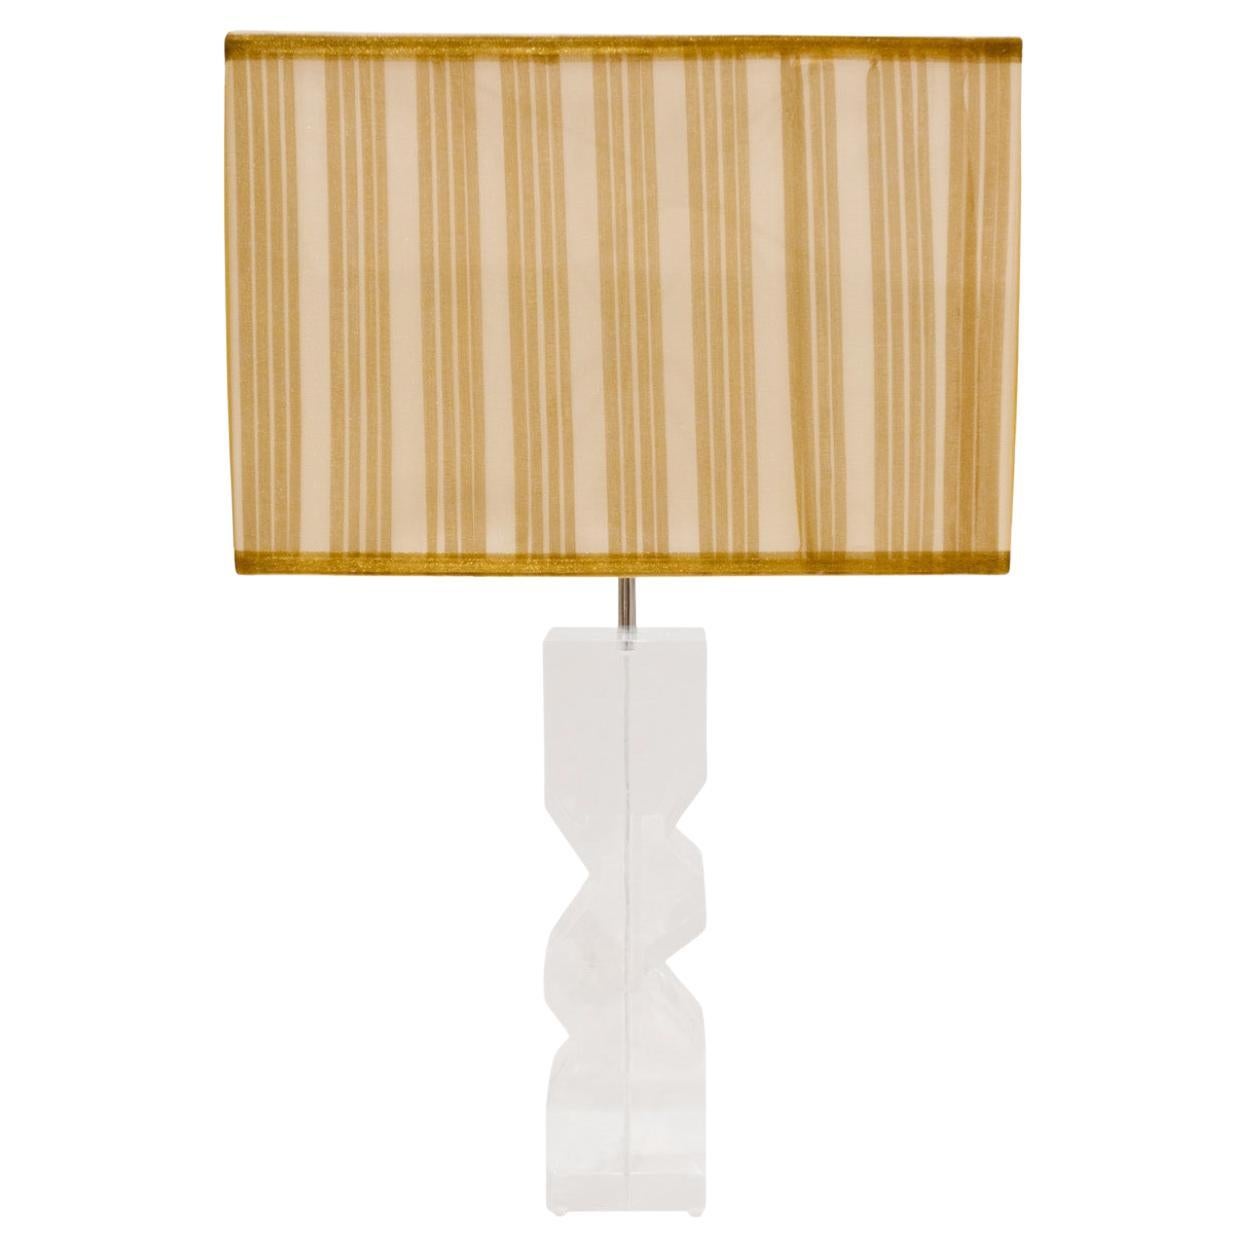 Les Prismatiques Zig Zag Table Lamp in Solid Lucite 1970s 'Signed' For Sale